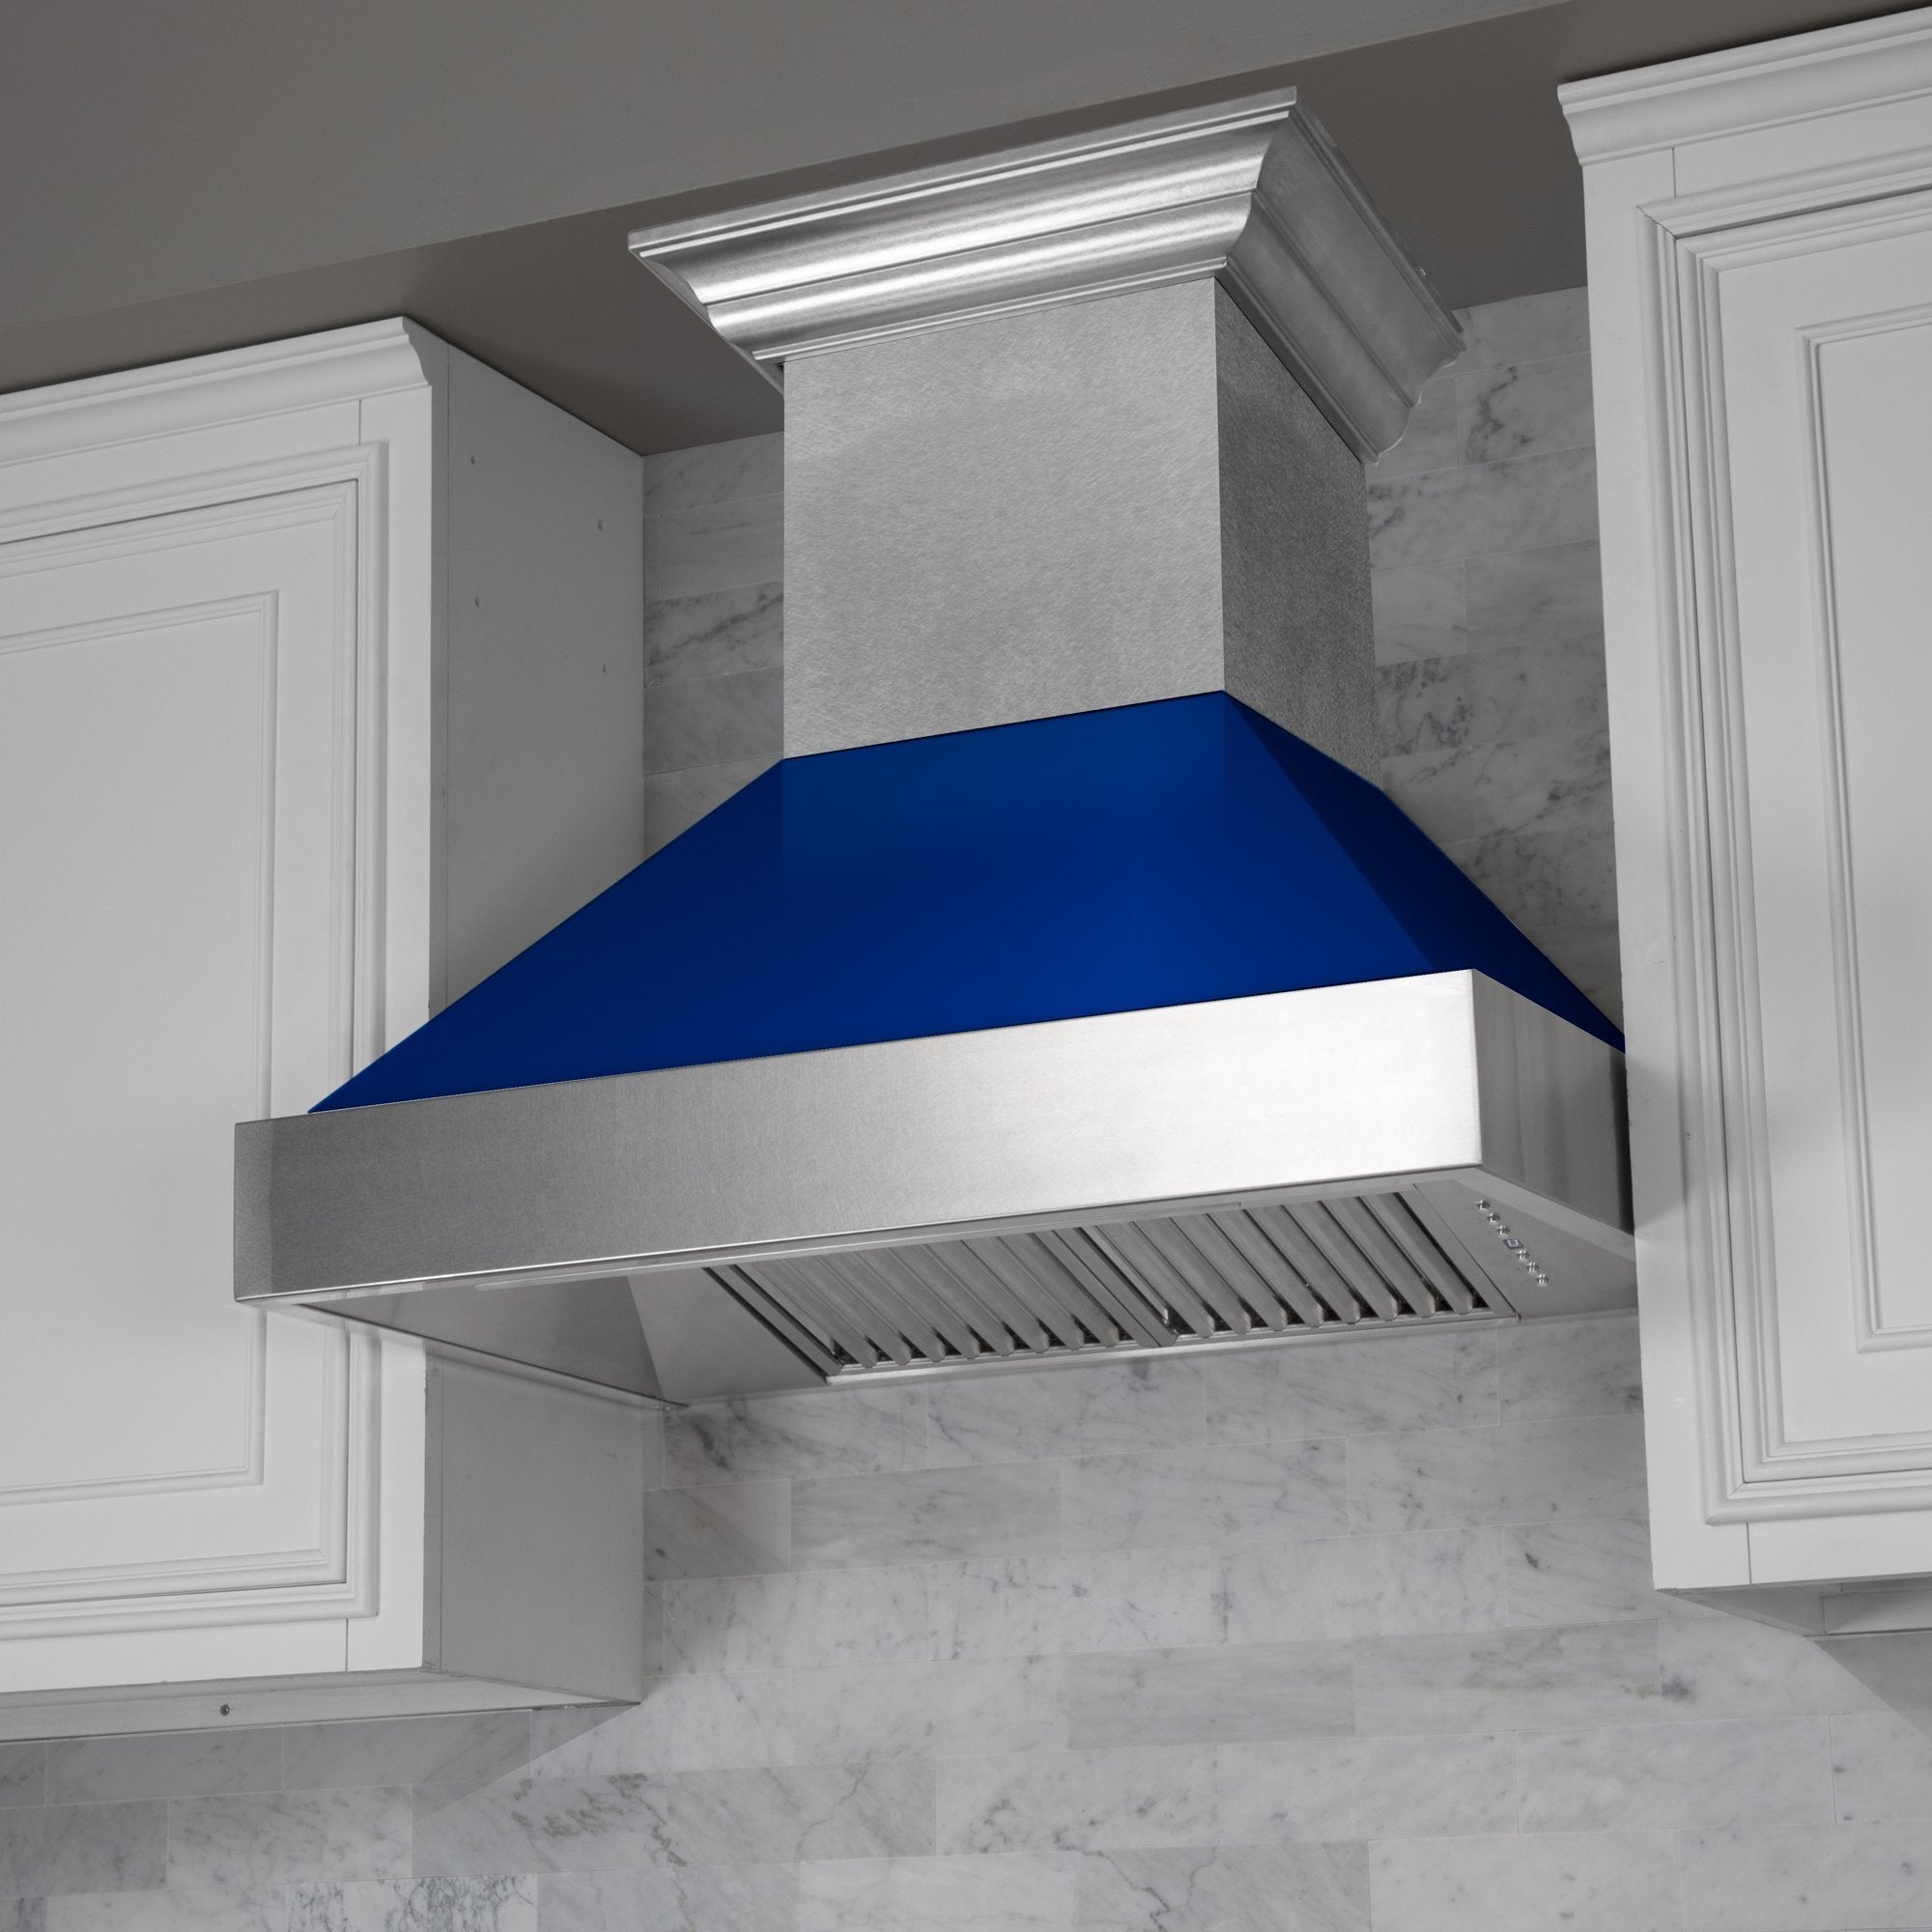 ZLINE Ducted Fingerprint Resistant Stainless Steel Range Hood with Blue Gloss Shell (8654BG) with short chimney in a kitchen.